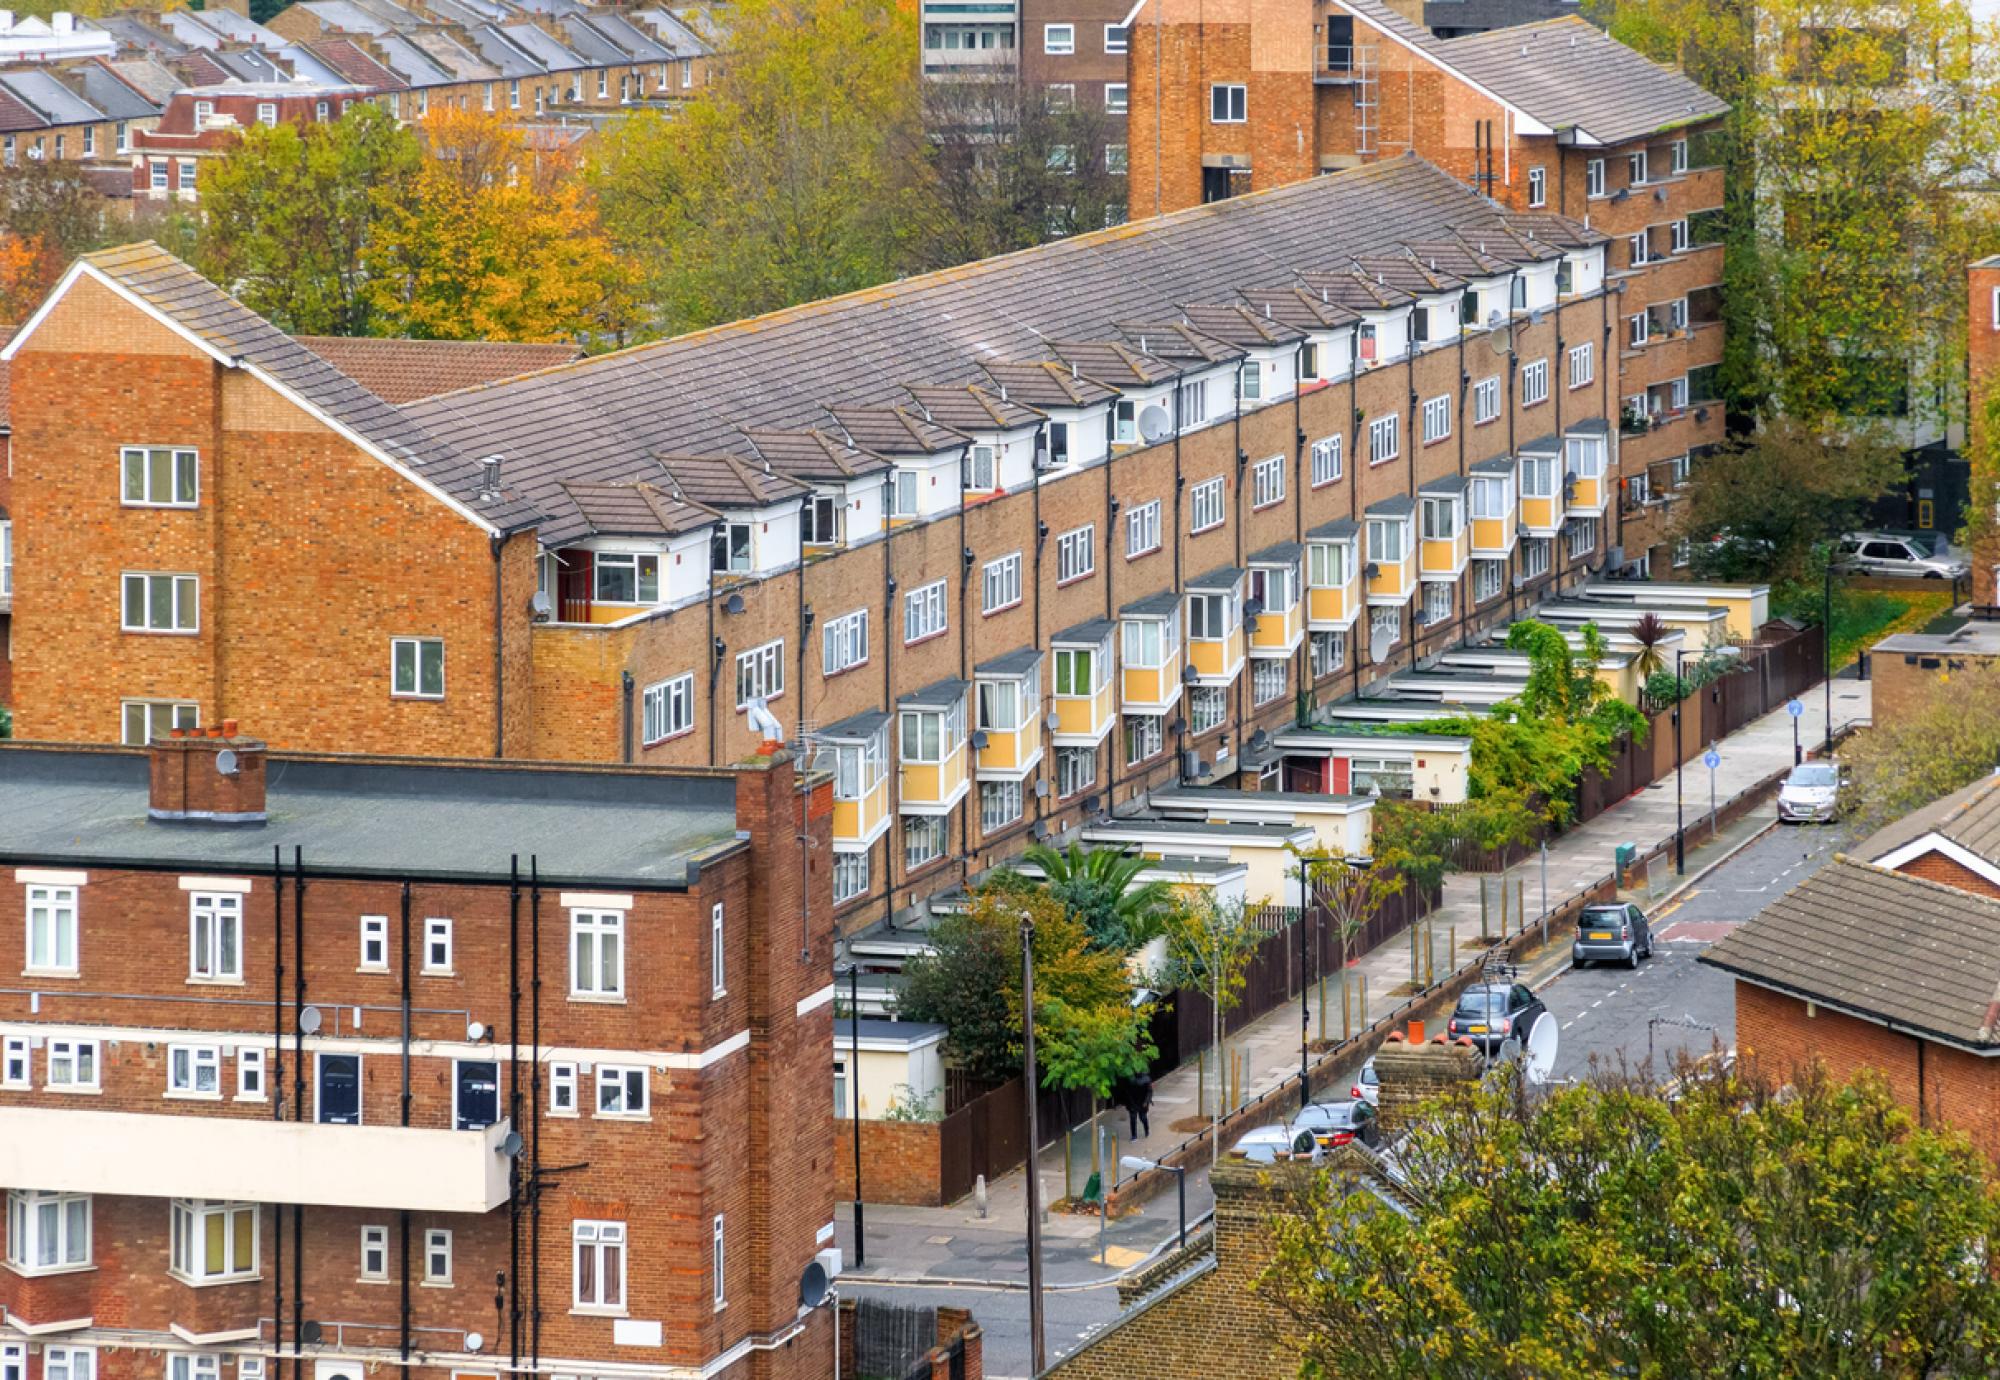 View of terraced houses in England